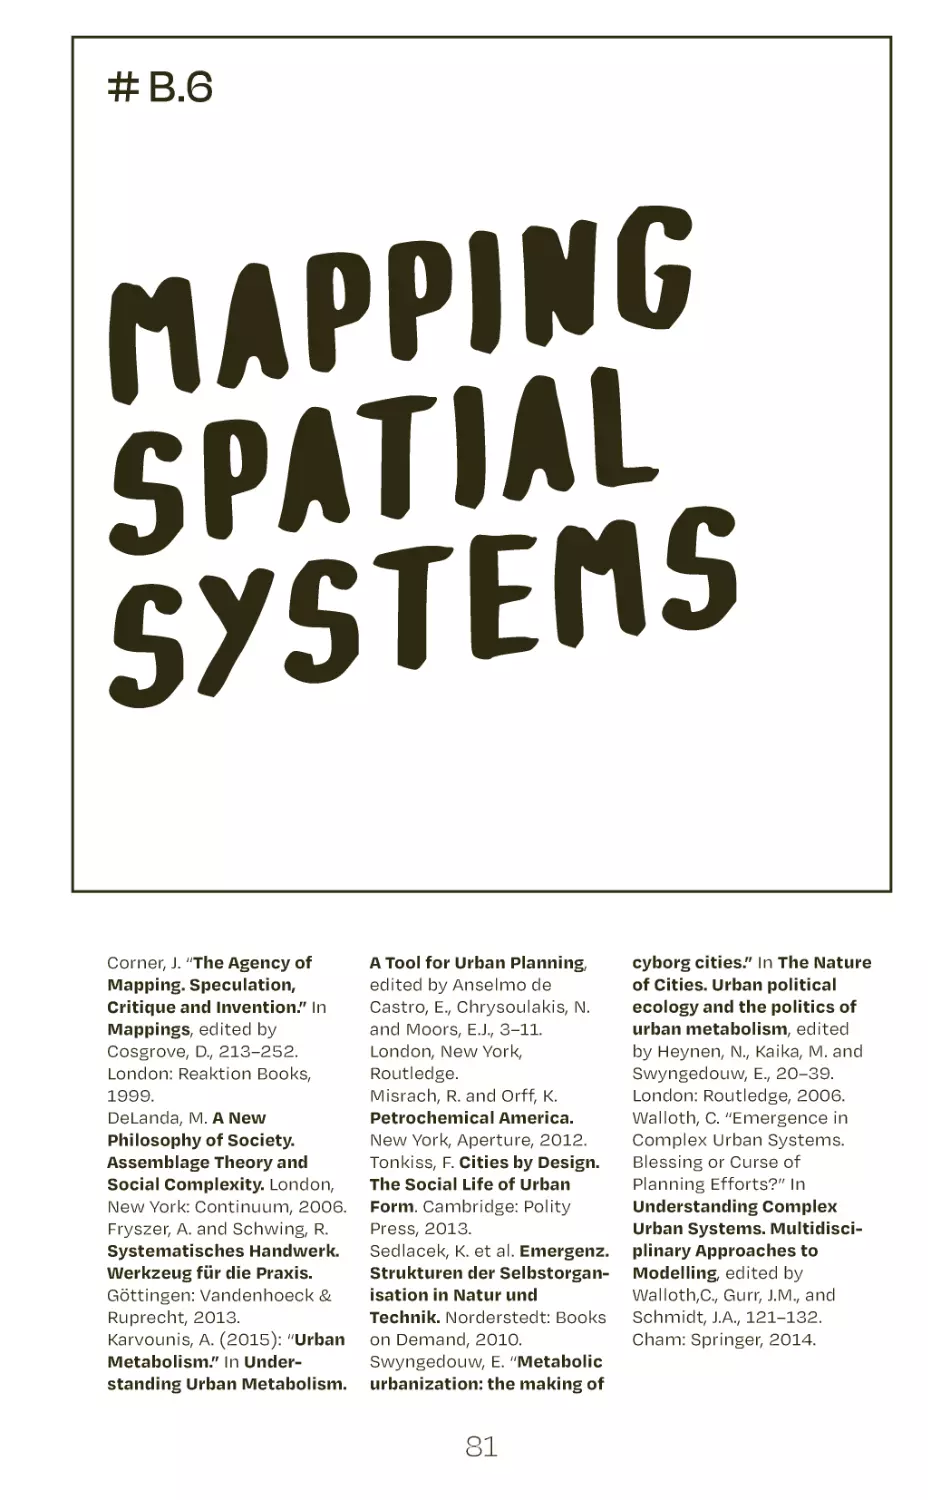 # B.6 mapping spatial systems